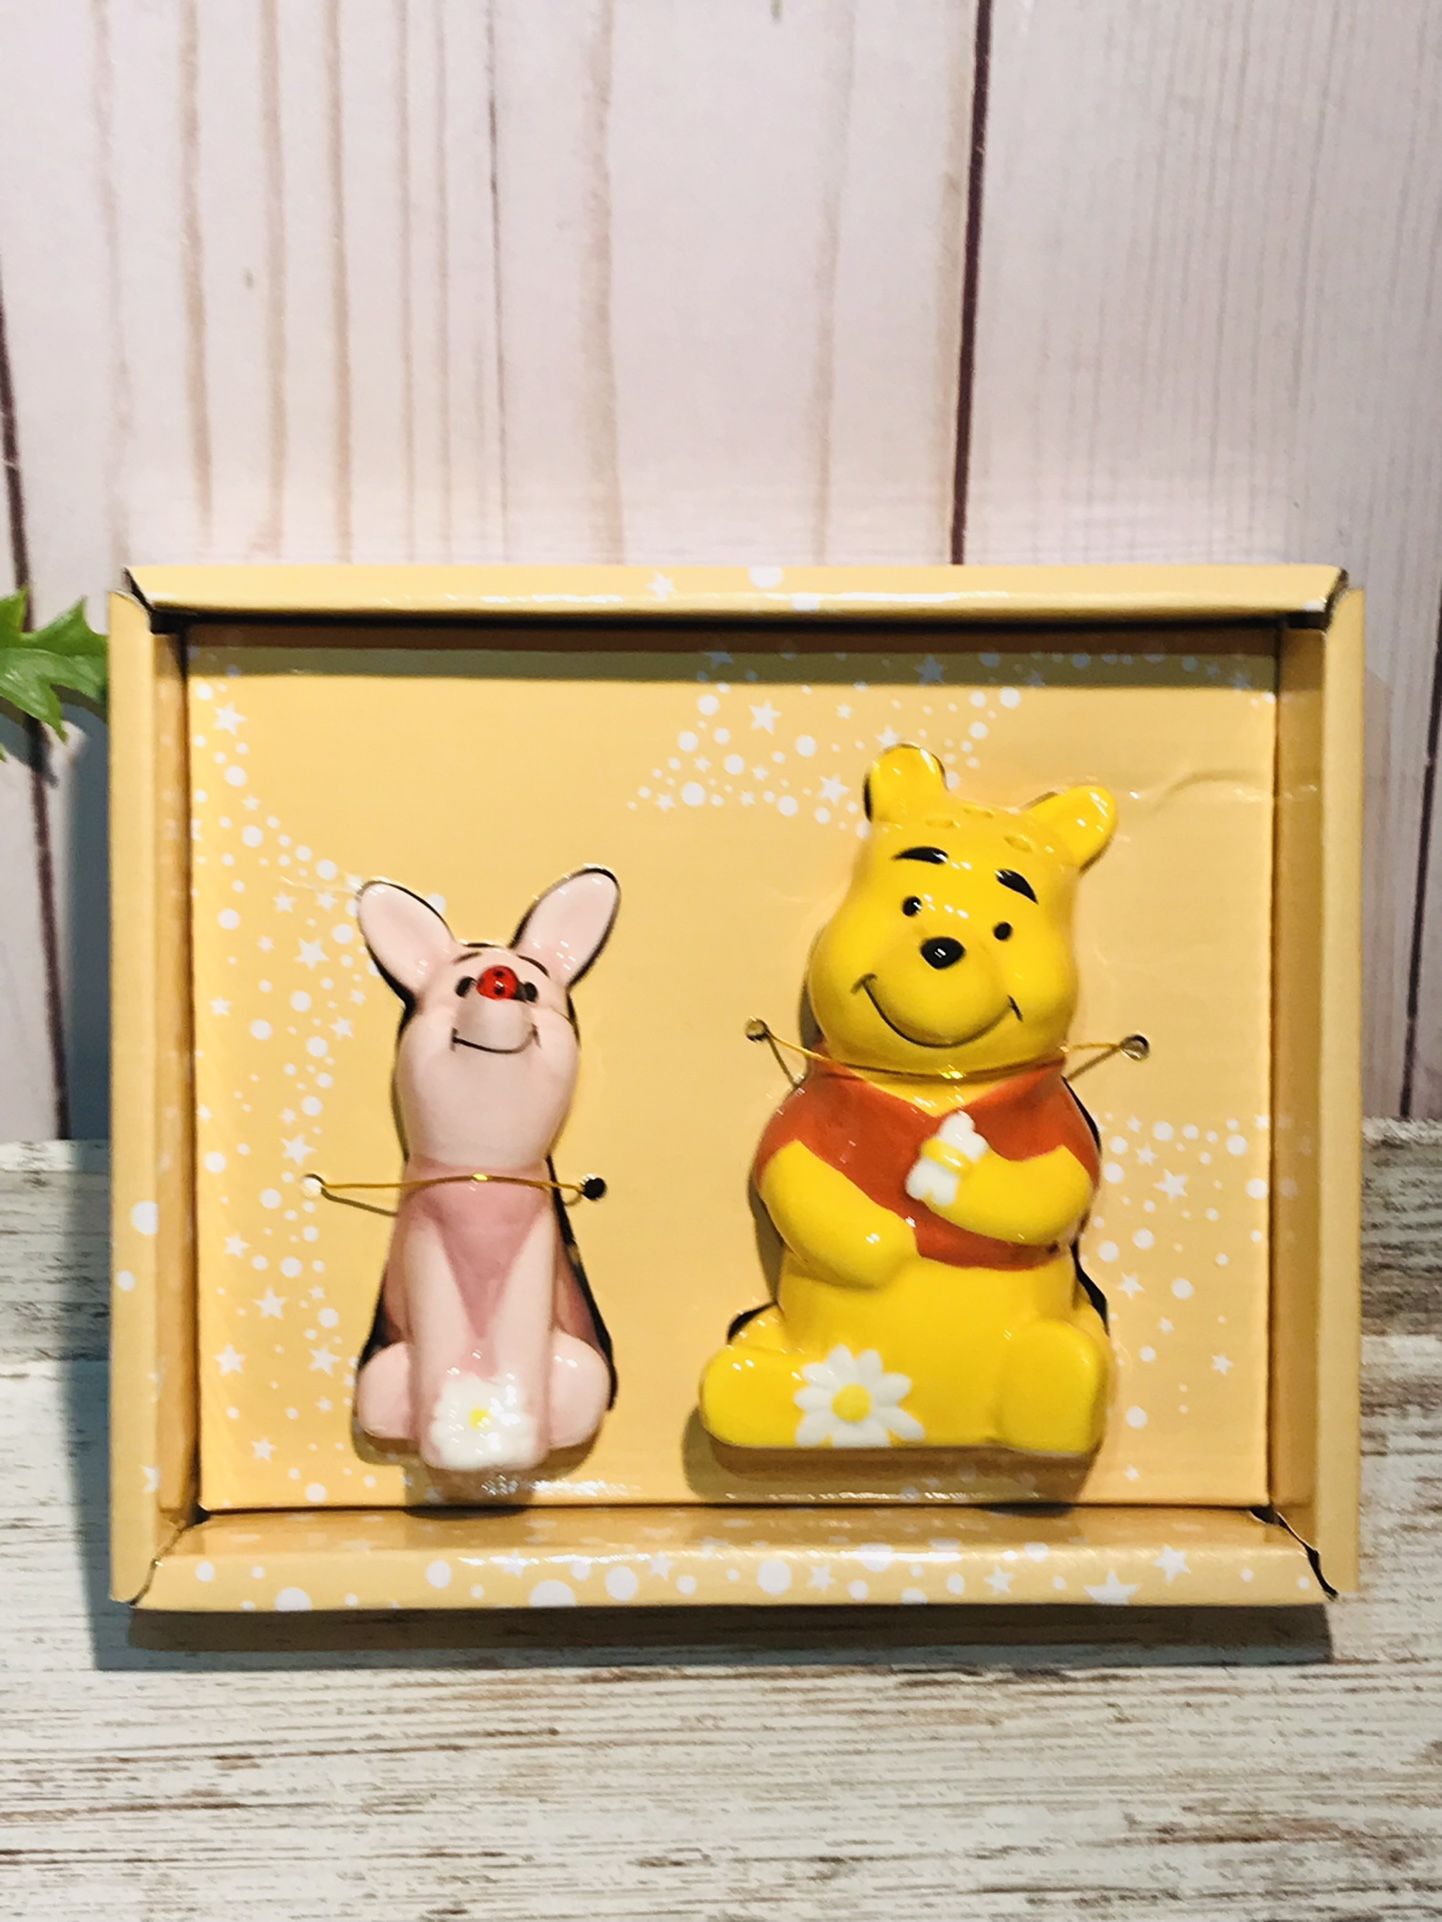 Disney Winnie The Pool And Piglet Salt And Pepper Shakers